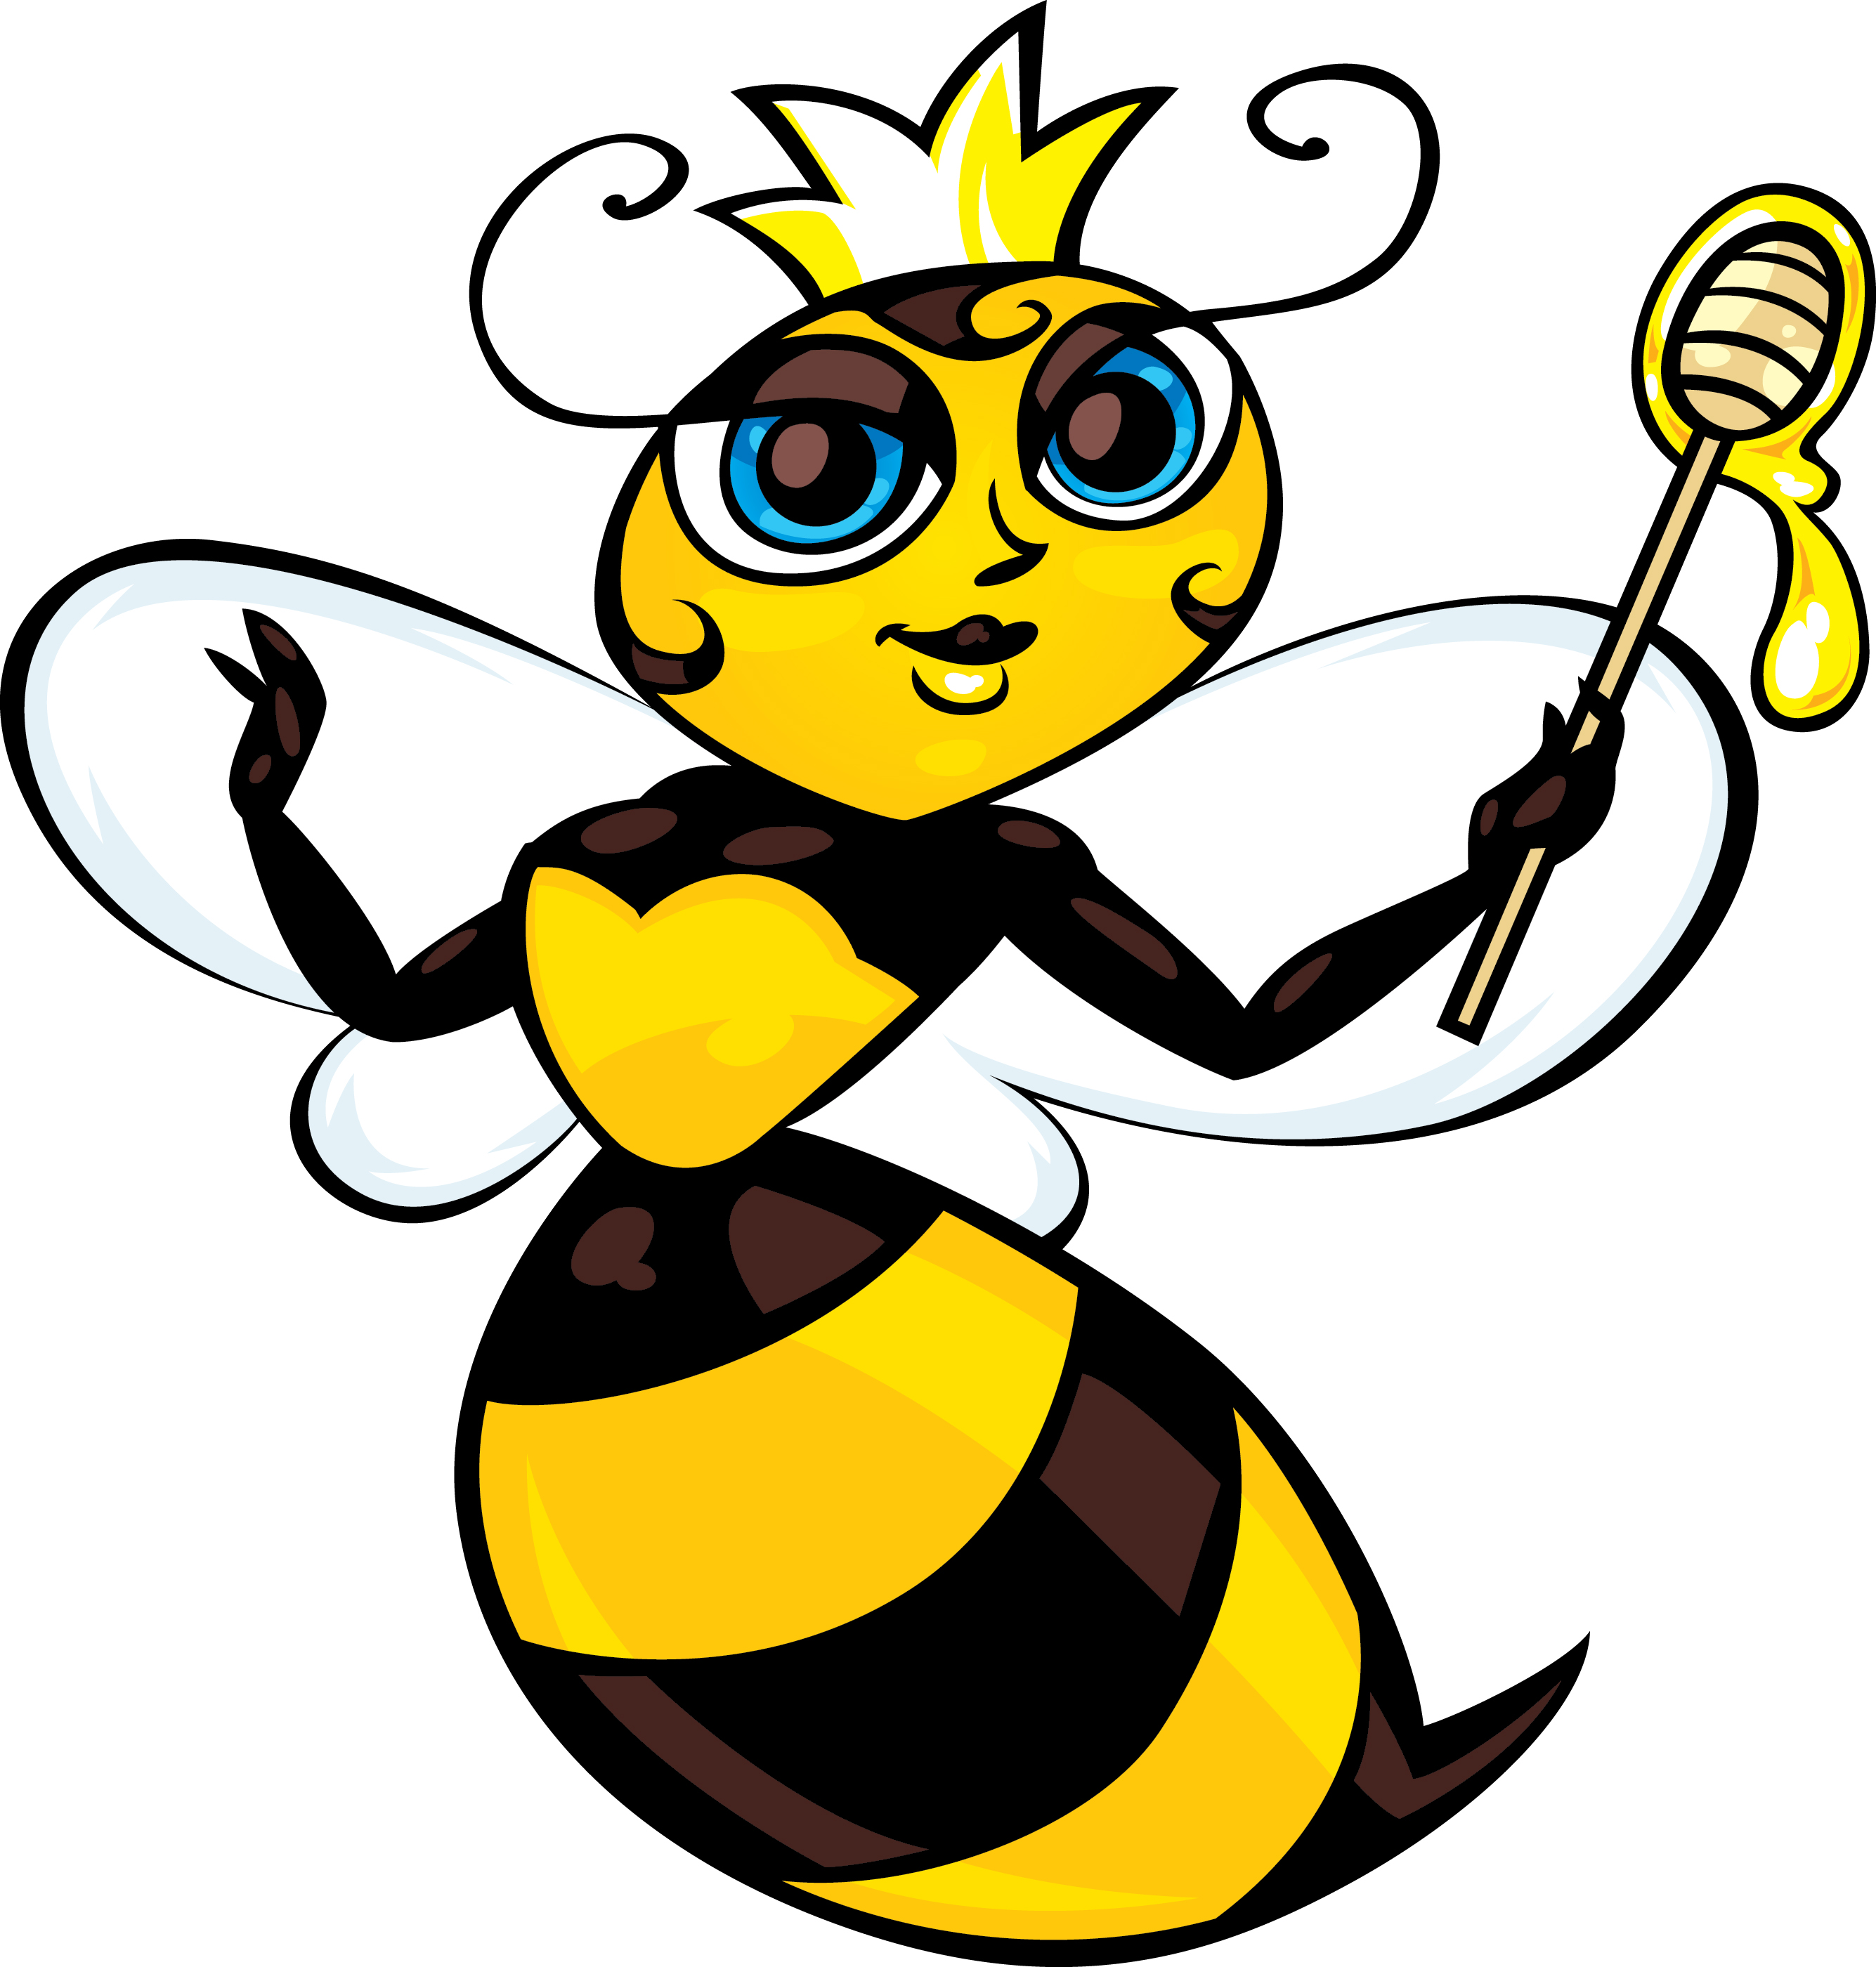 Animated Queen Bee Image